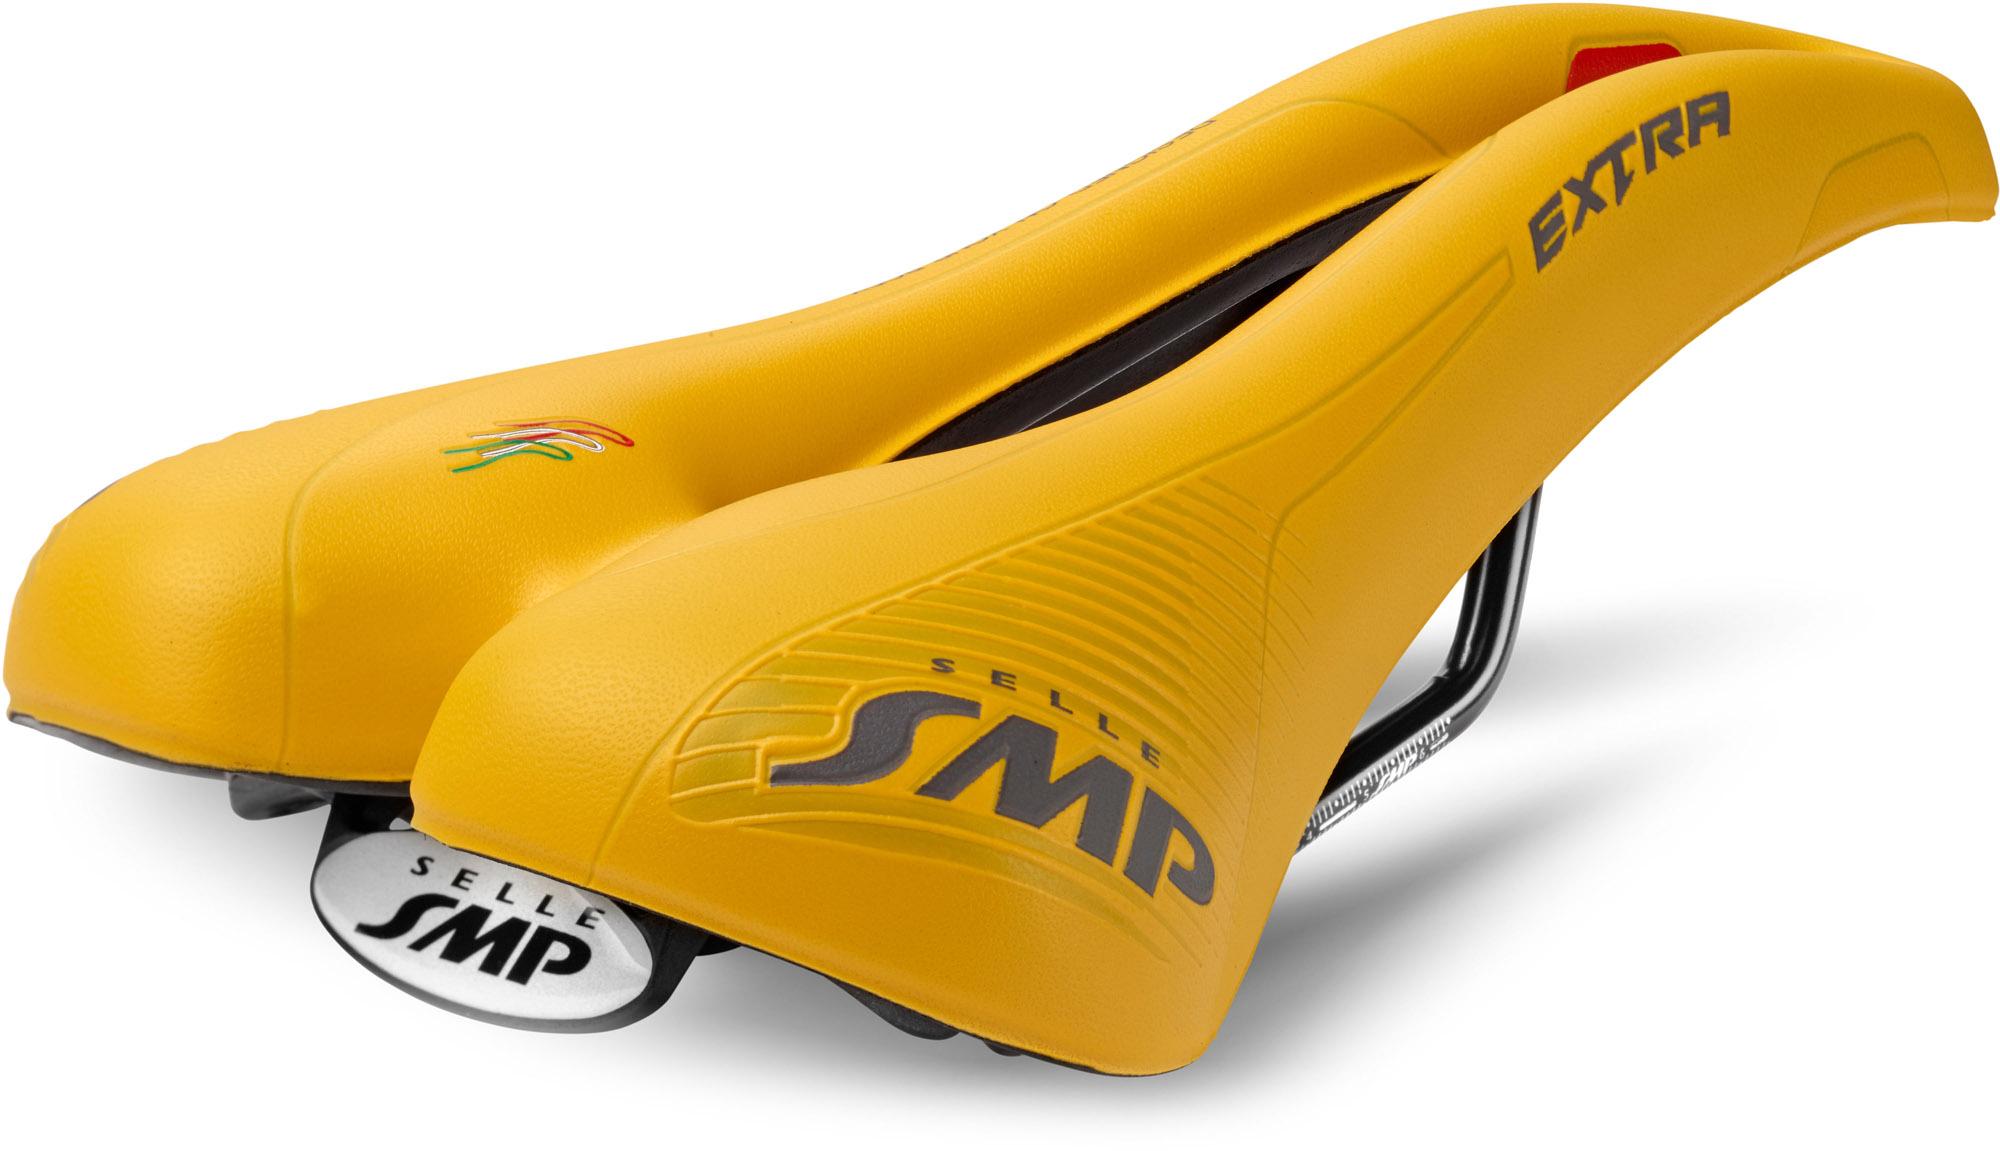 Selle Smp Extra Saddle - Yellow